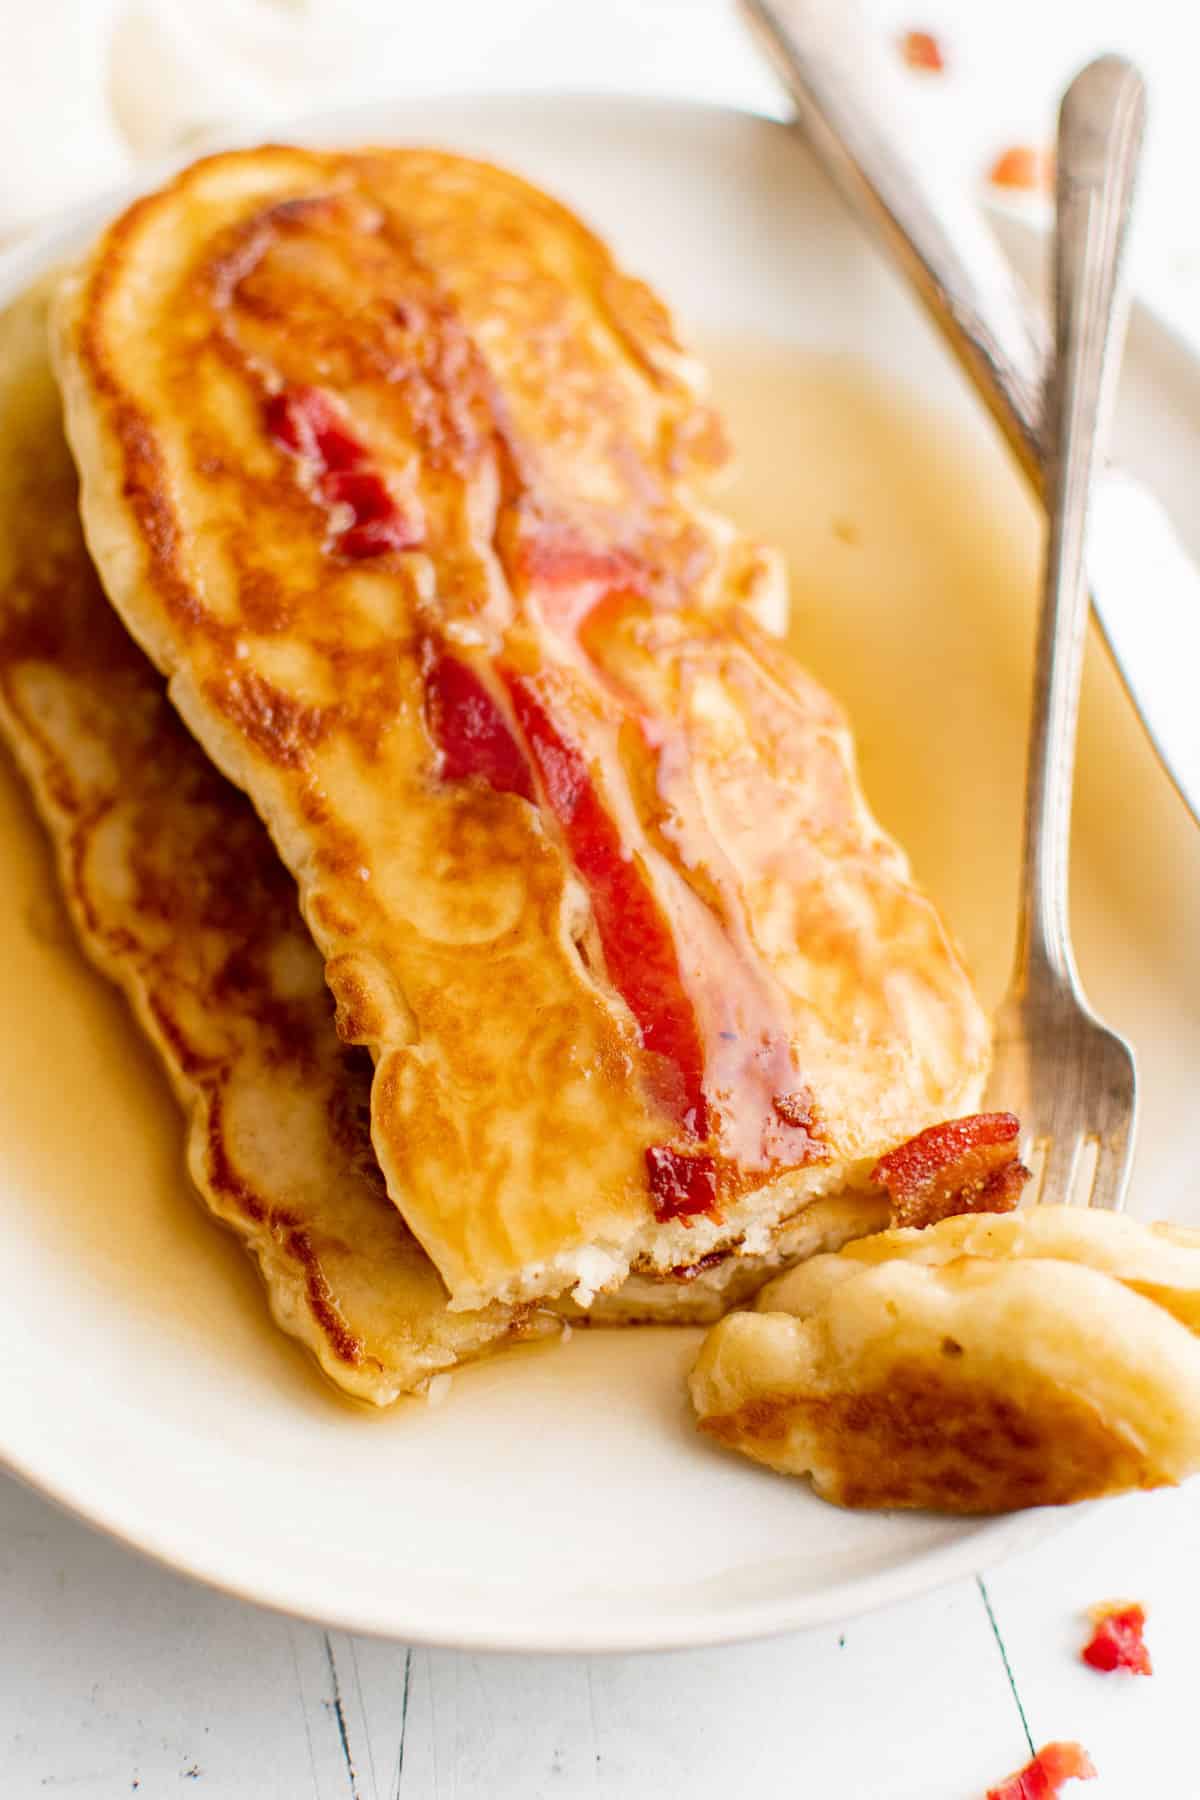 Oval shaped pancakes with a slice of bacon in them, with syrup.